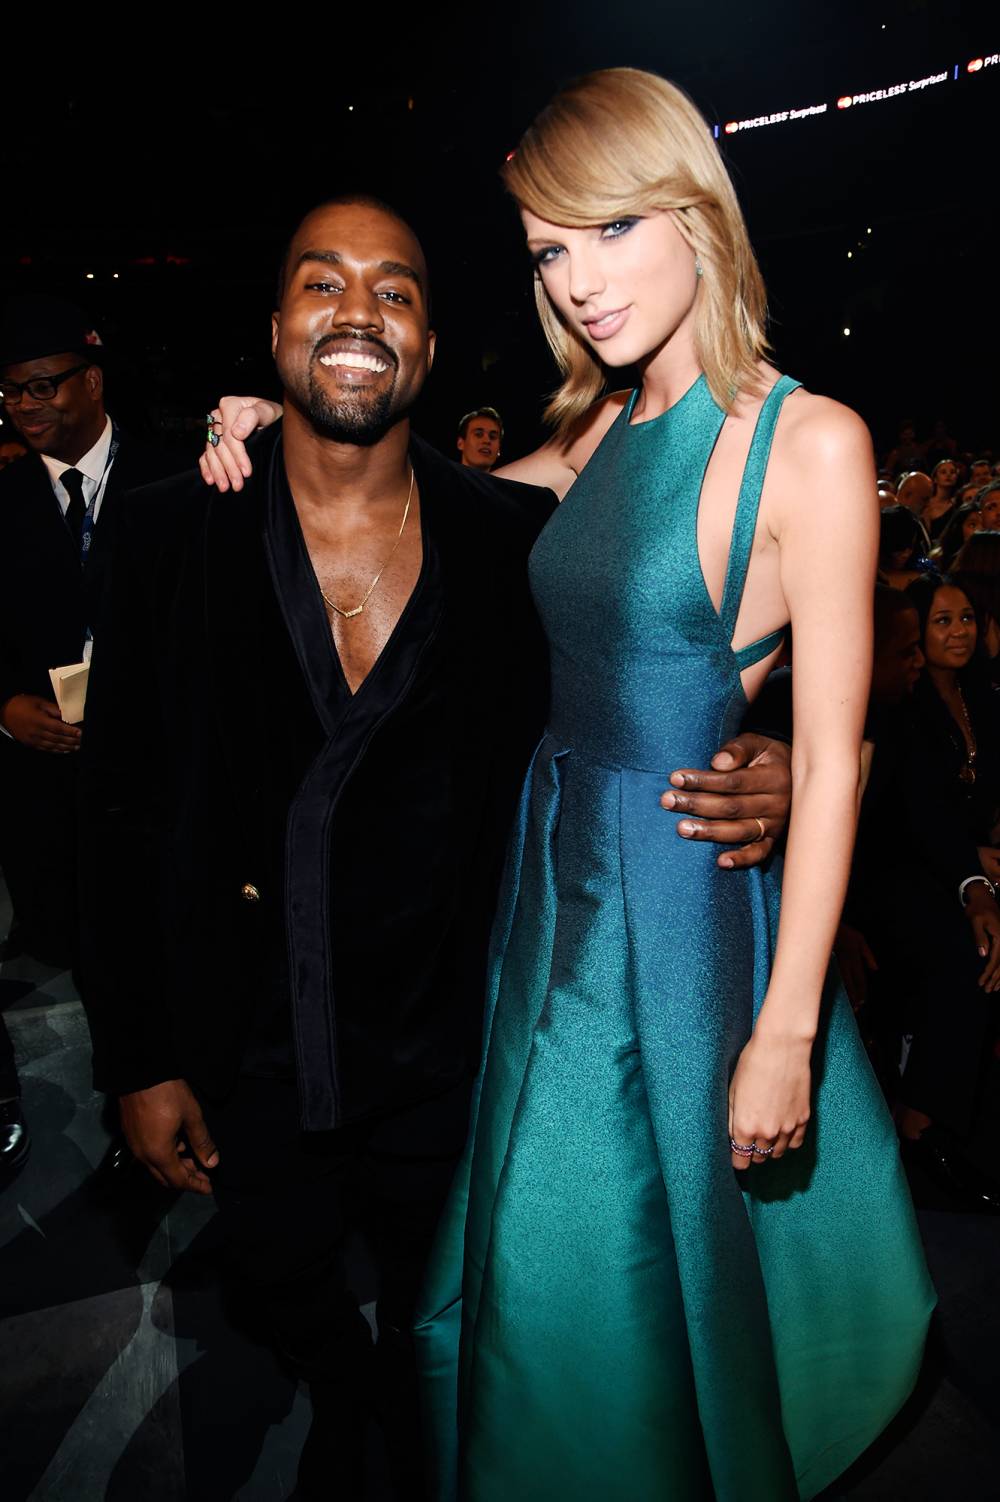 Taylor Swift vs. Kanye West: Controversy, Truth Revisited